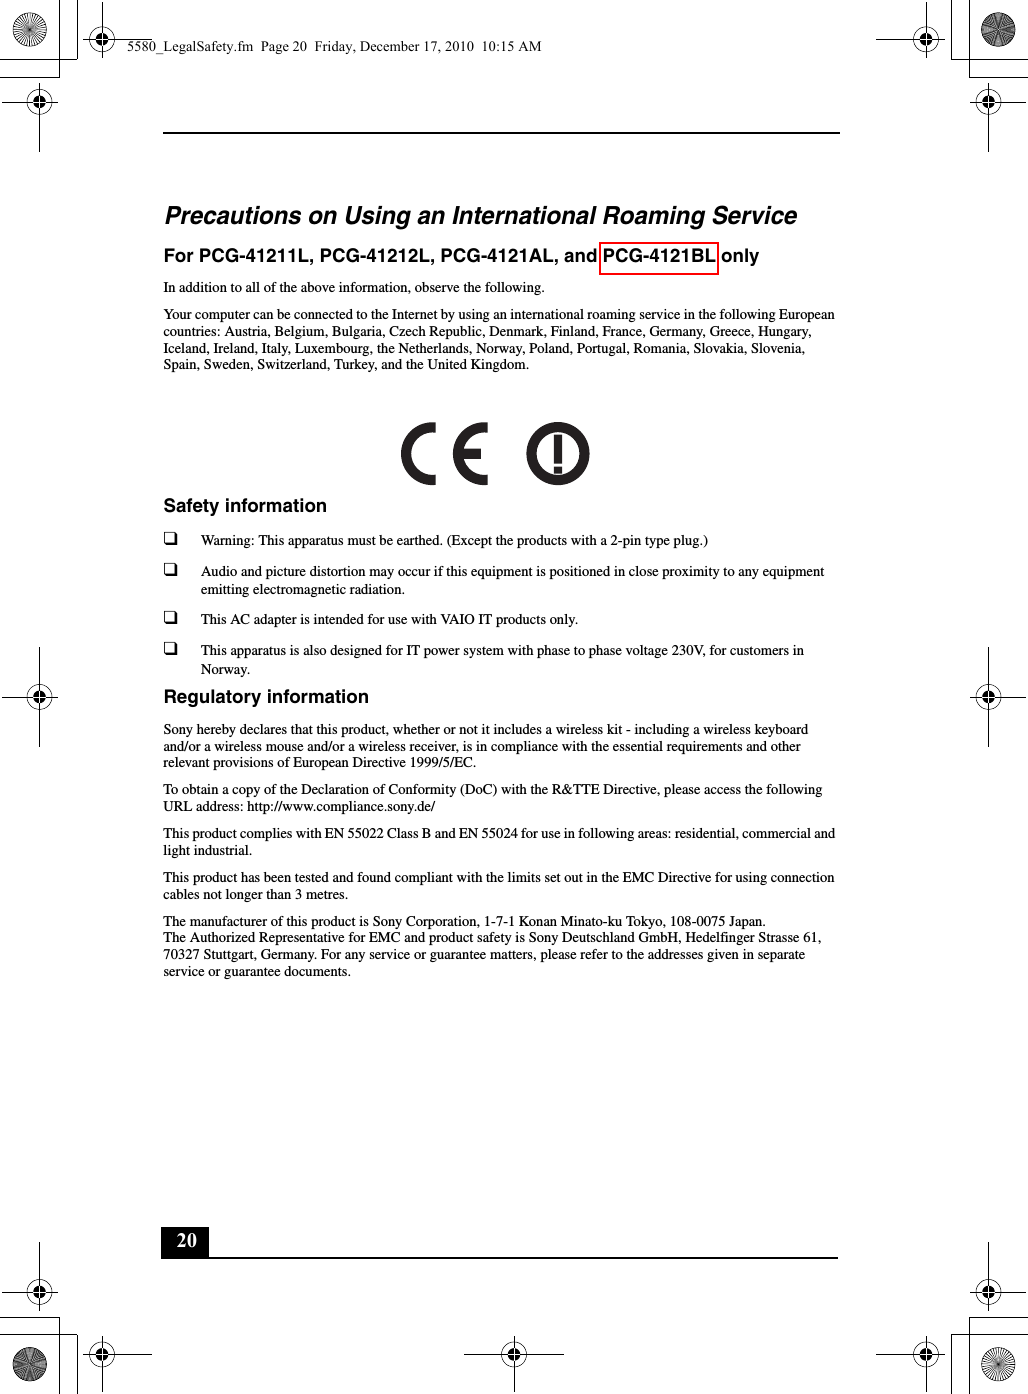 20Precautions on Using an International Roaming ServiceFor PCG-41211L, PCG-41212L, PCG-4121AL, and PCG-4121BL onlyIn addition to all of the above information, observe the following.Your computer can be connected to the Internet by using an international roaming service in the following European countries: Austria, Belgium, Bulgaria, Czech Republic, Denmark, Finland, France, Germany, Greece, Hungary, Iceland, Ireland, Italy, Luxembourg, the Netherlands, Norway, Poland, Portugal, Romania, Slovakia, Slovenia, Spain, Sweden, Switzerland, Turkey, and the United Kingdom.Safety information❑Warning: This apparatus must be earthed. (Except the products with a 2-pin type plug.)❑Audio and picture distortion may occur if this equipment is positioned in close proximity to any equipment emitting electromagnetic radiation.❑This AC adapter is intended for use with VAIO IT products only.❑This apparatus is also designed for IT power system with phase to phase voltage 230V, for customers in Norway.Regulatory informationSony hereby declares that this product, whether or not it includes a wireless kit - including a wireless keyboard and/or a wireless mouse and/or a wireless receiver, is in compliance with the essential requirements and other relevant provisions of European Directive 1999/5/EC.To obtain a copy of the Declaration of Conformity (DoC) with the R&amp;TTE Directive, please access the following URL address: http://www.compliance.sony.de/This product complies with EN 55022 Class B and EN 55024 for use in following areas: residential, commercial and light industrial.This product has been tested and found compliant with the limits set out in the EMC Directive for using connection cables not longer than 3 metres.The manufacturer of this product is Sony Corporation, 1-7-1 Konan Minato-ku Tokyo, 108-0075 Japan.The Authorized Representative for EMC and product safety is Sony Deutschland GmbH, Hedelfinger Strasse 61, 70327 Stuttgart, Germany. For any service or guarantee matters, please refer to the addresses given in separate service or guarantee documents.5580_LegalSafety.fm  Page 20  Friday, December 17, 2010  10:15 AM